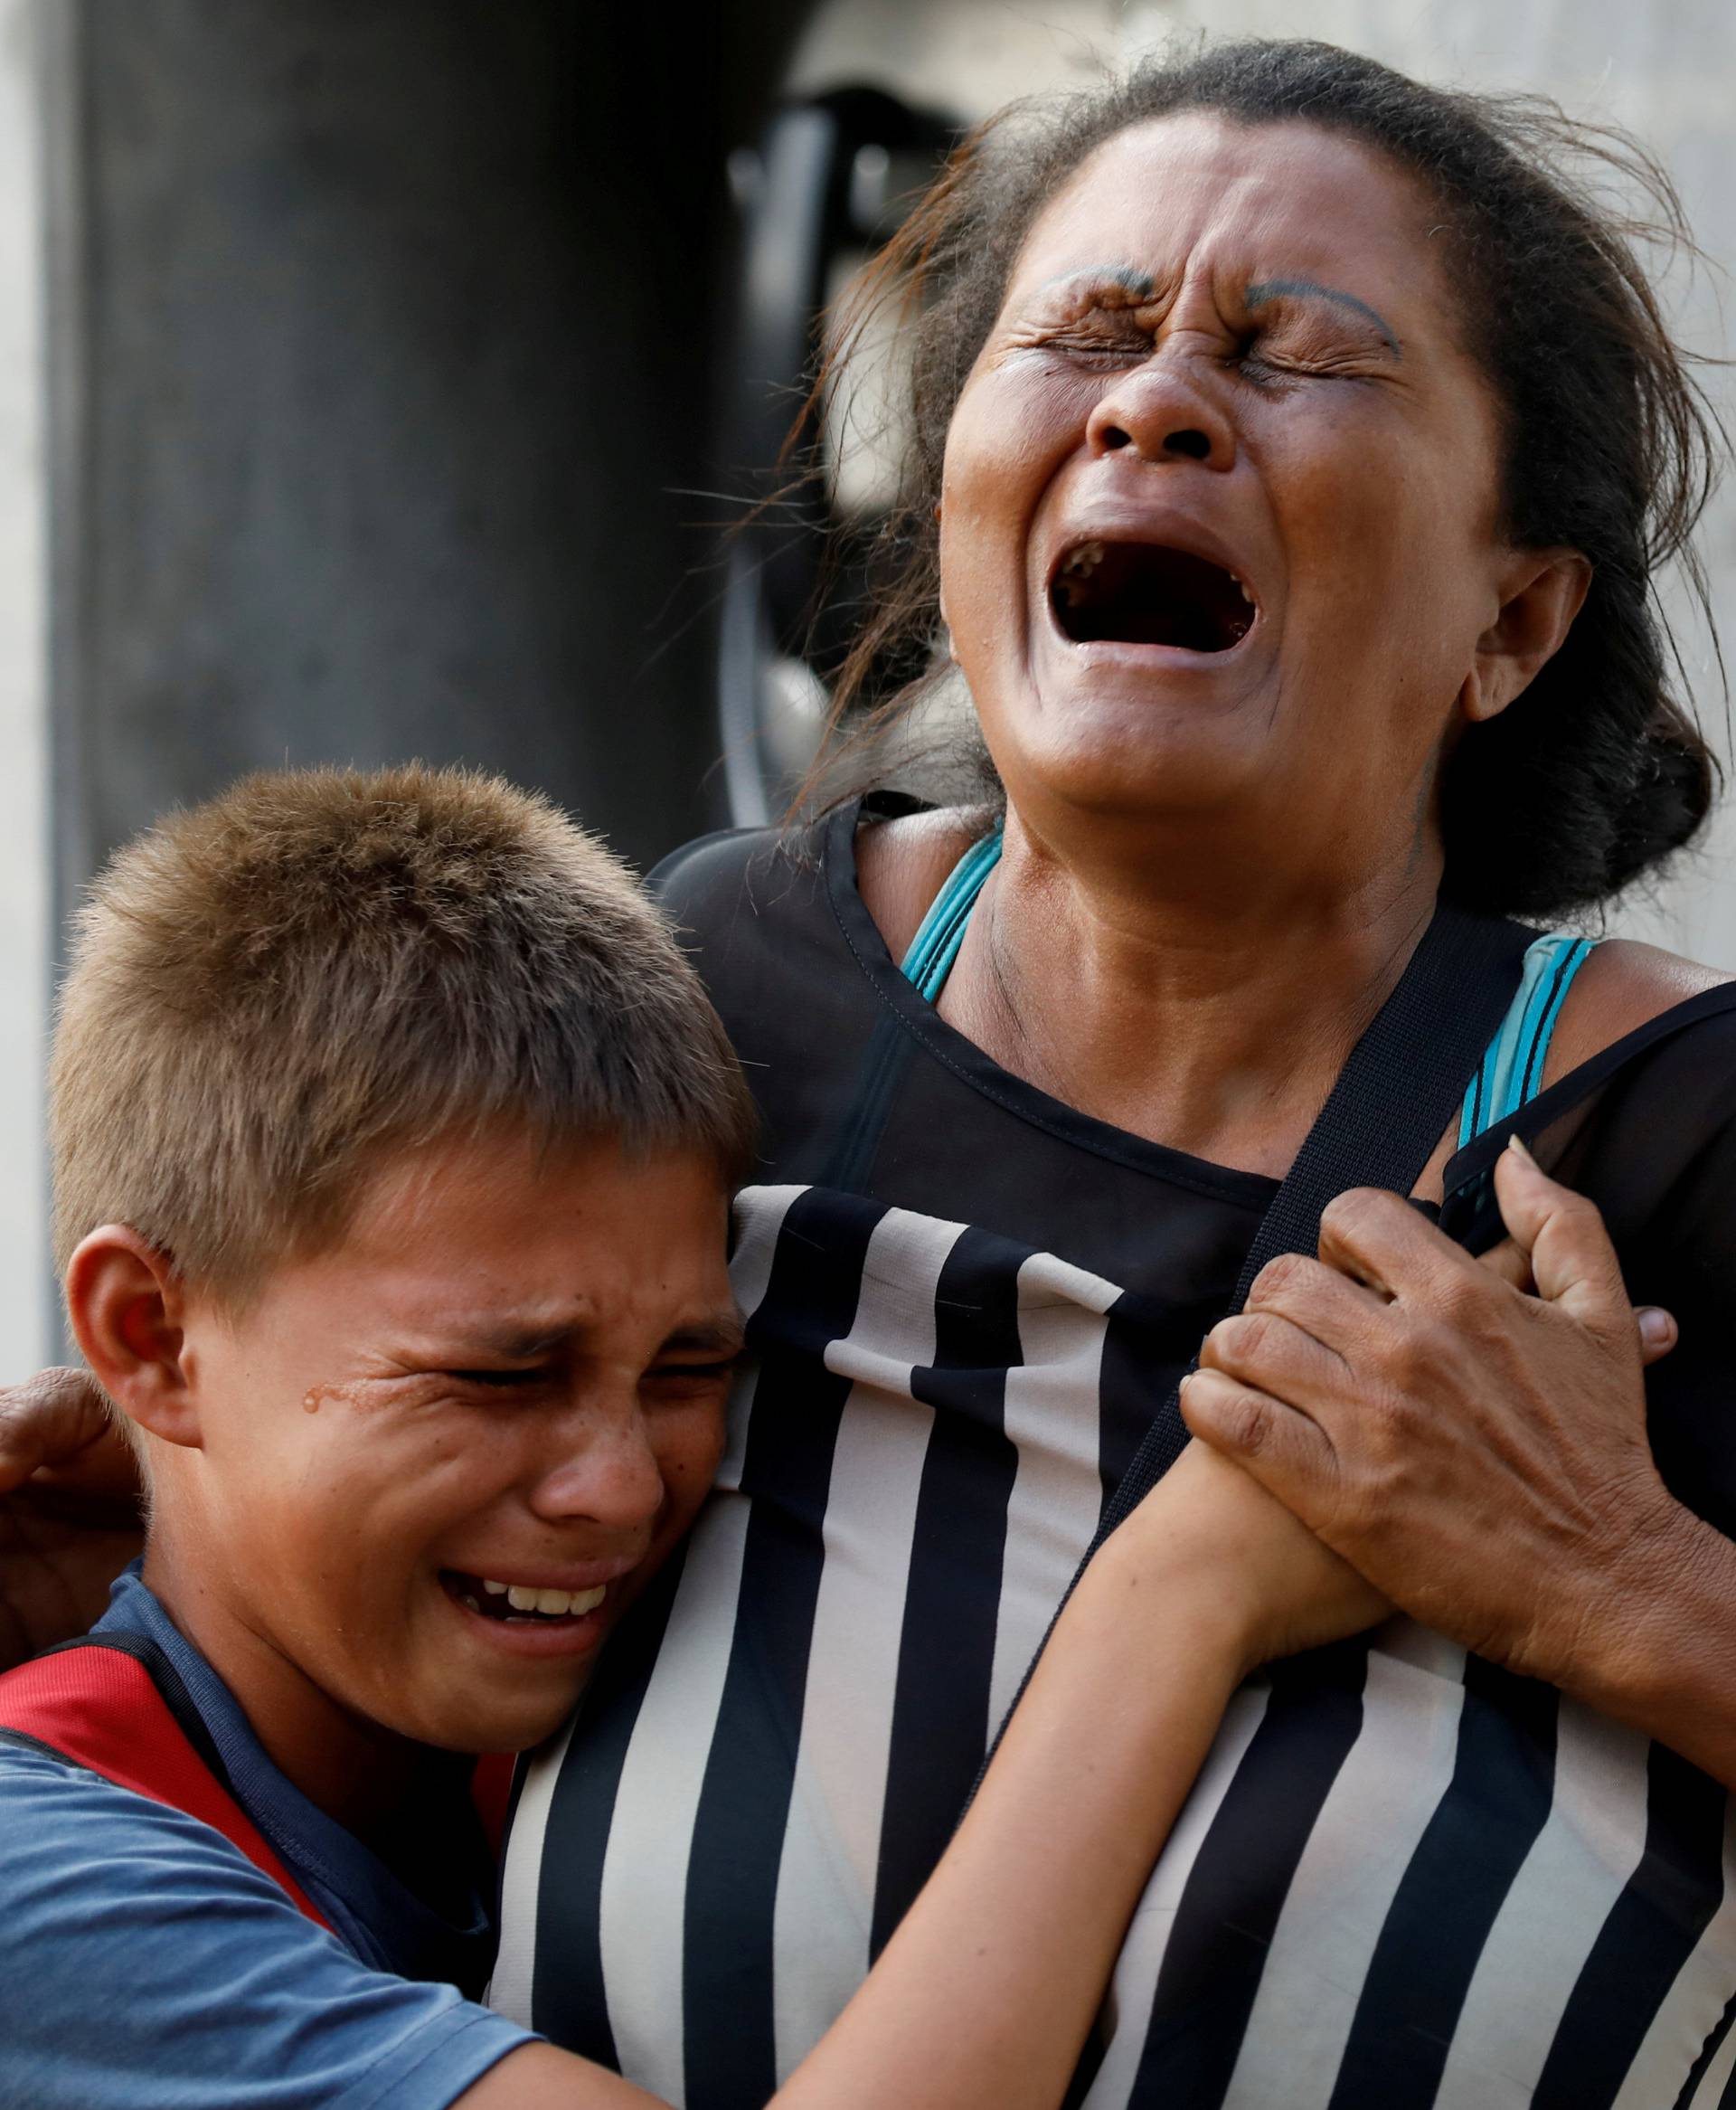 Relatives of inmates held at the General Command of the Carabobo Police react as they wait outside the prison where a fire occurred in the cells area in Valencia